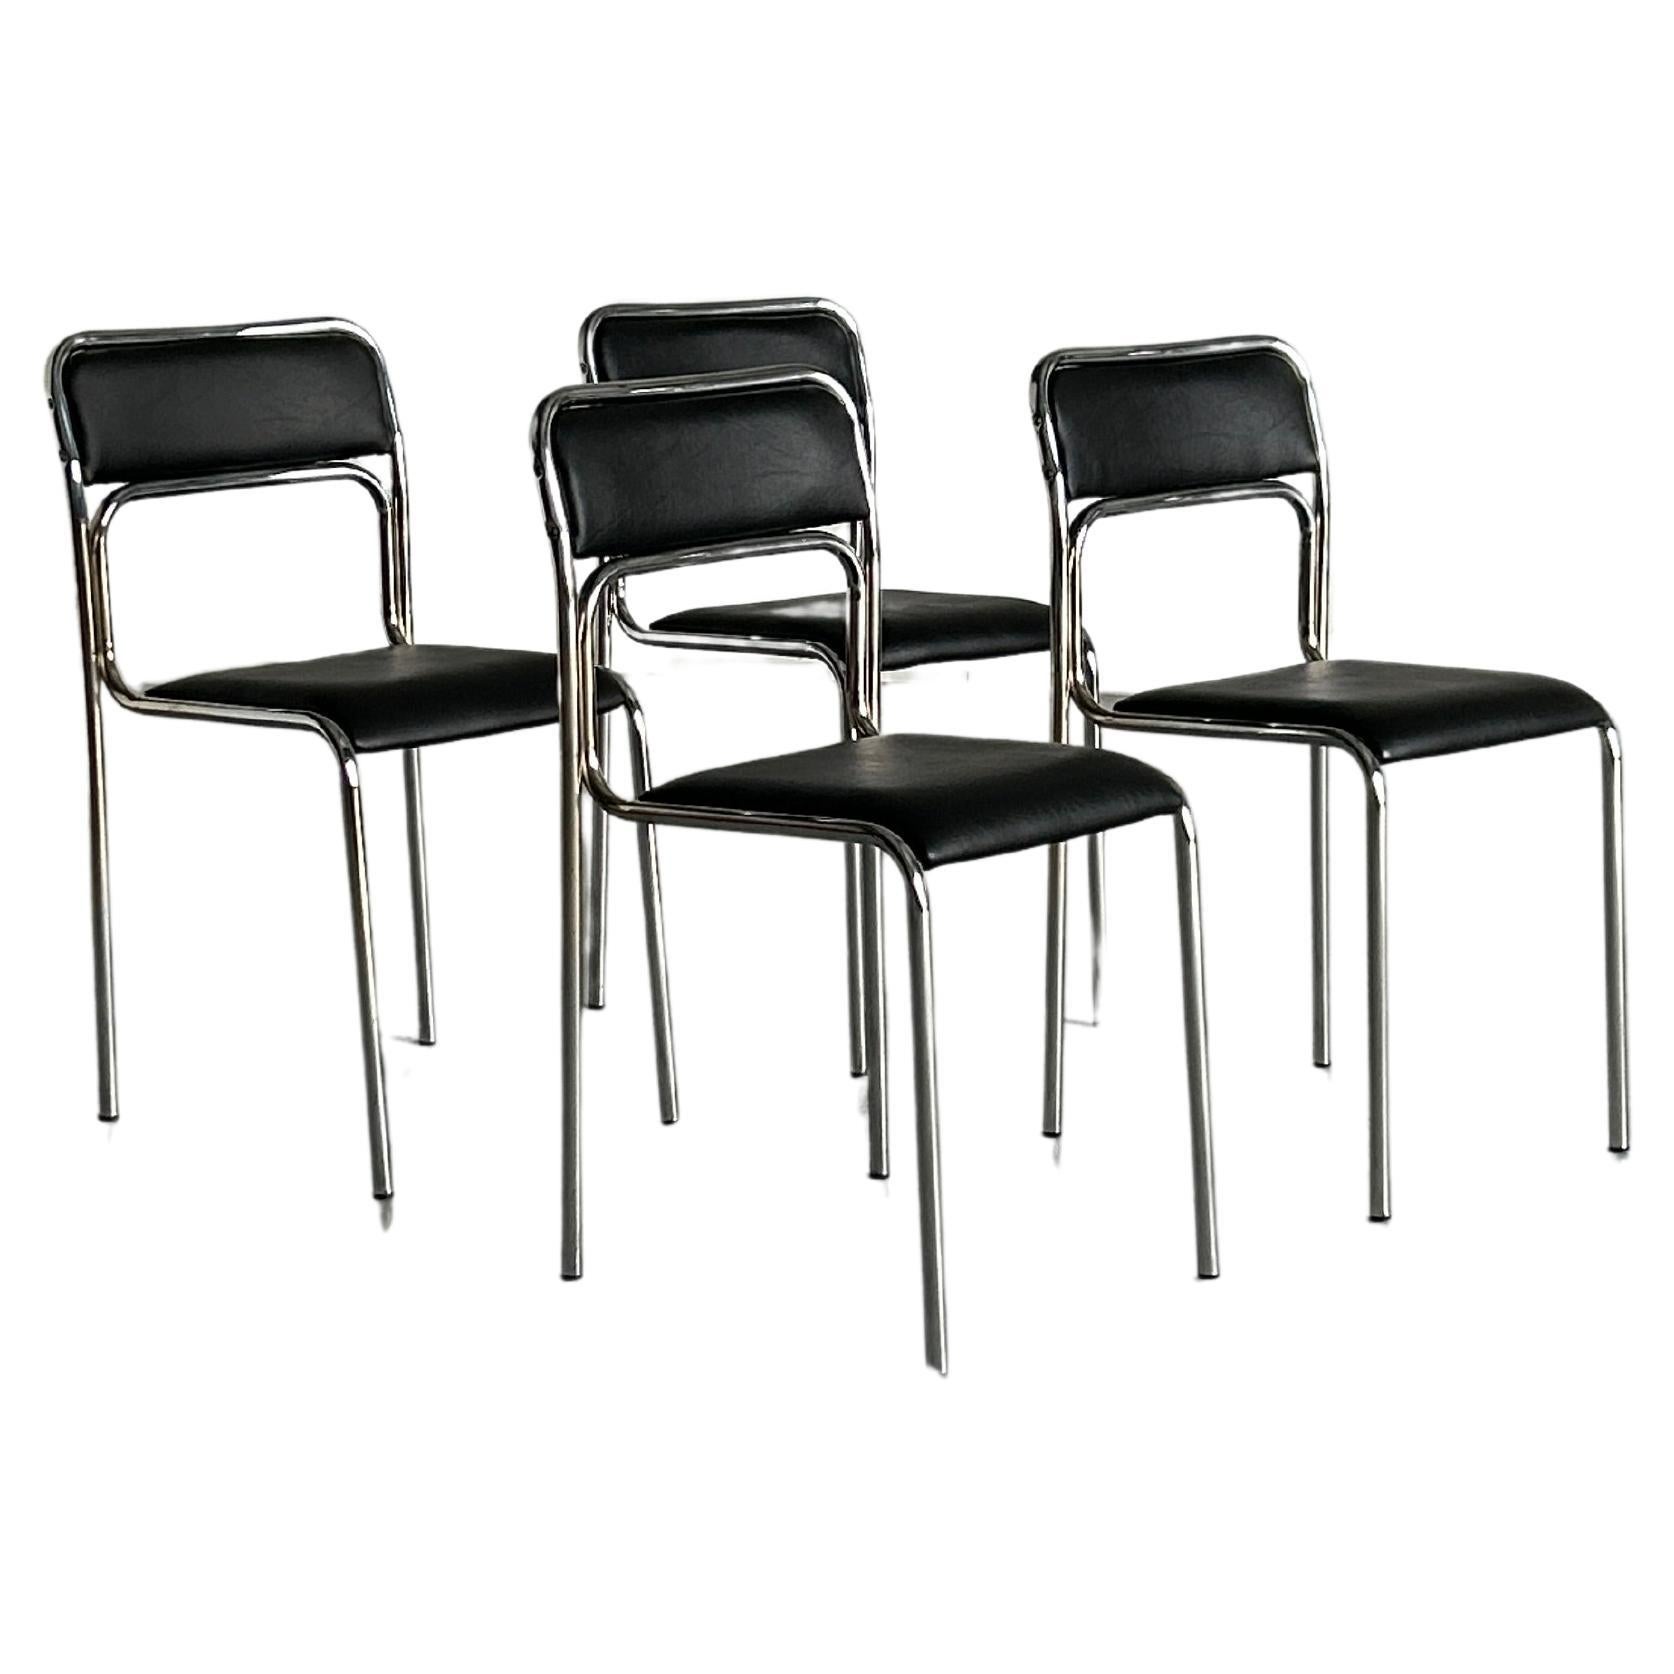 Set of 4 Bauhaus Chrome Tubular Steel and Black Chrome Leather Chairs, 80s Italy